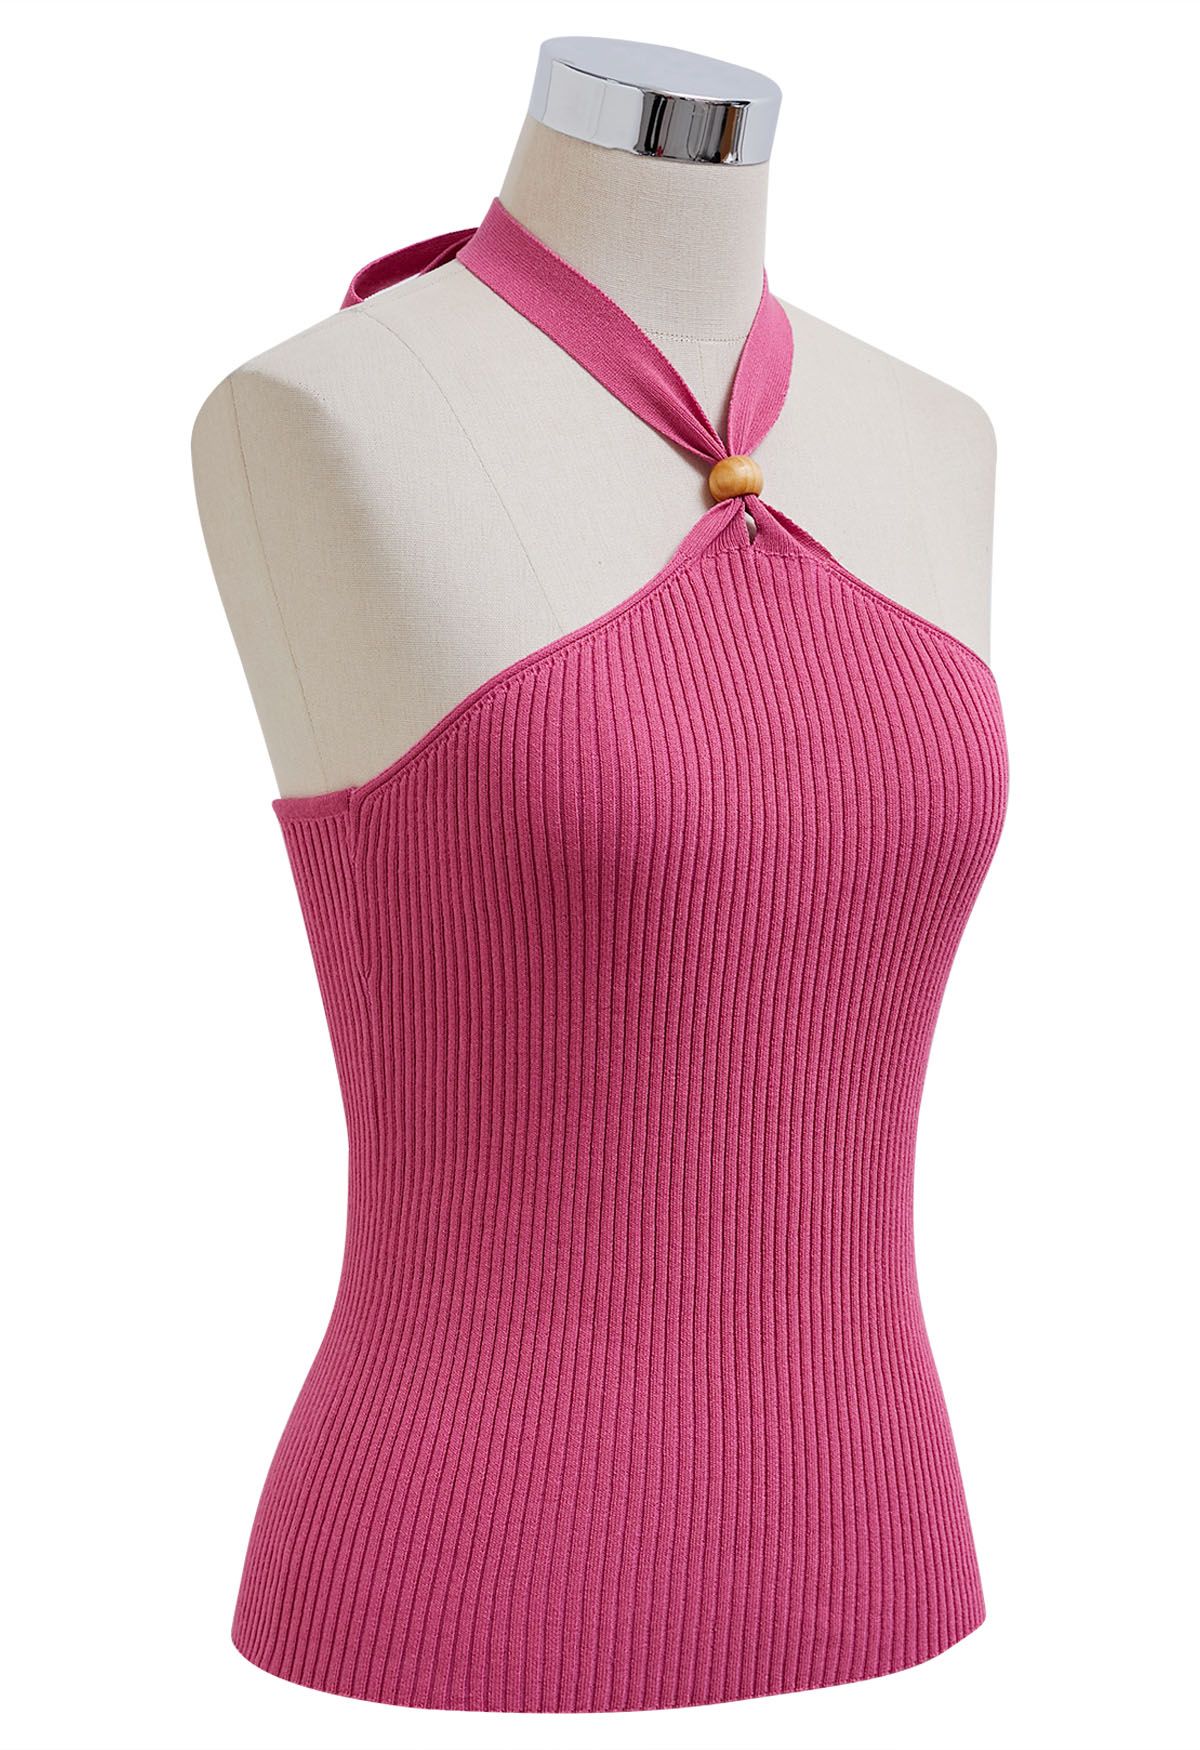 Wooden Bead Decor Halter Knit Top in Hot Pink